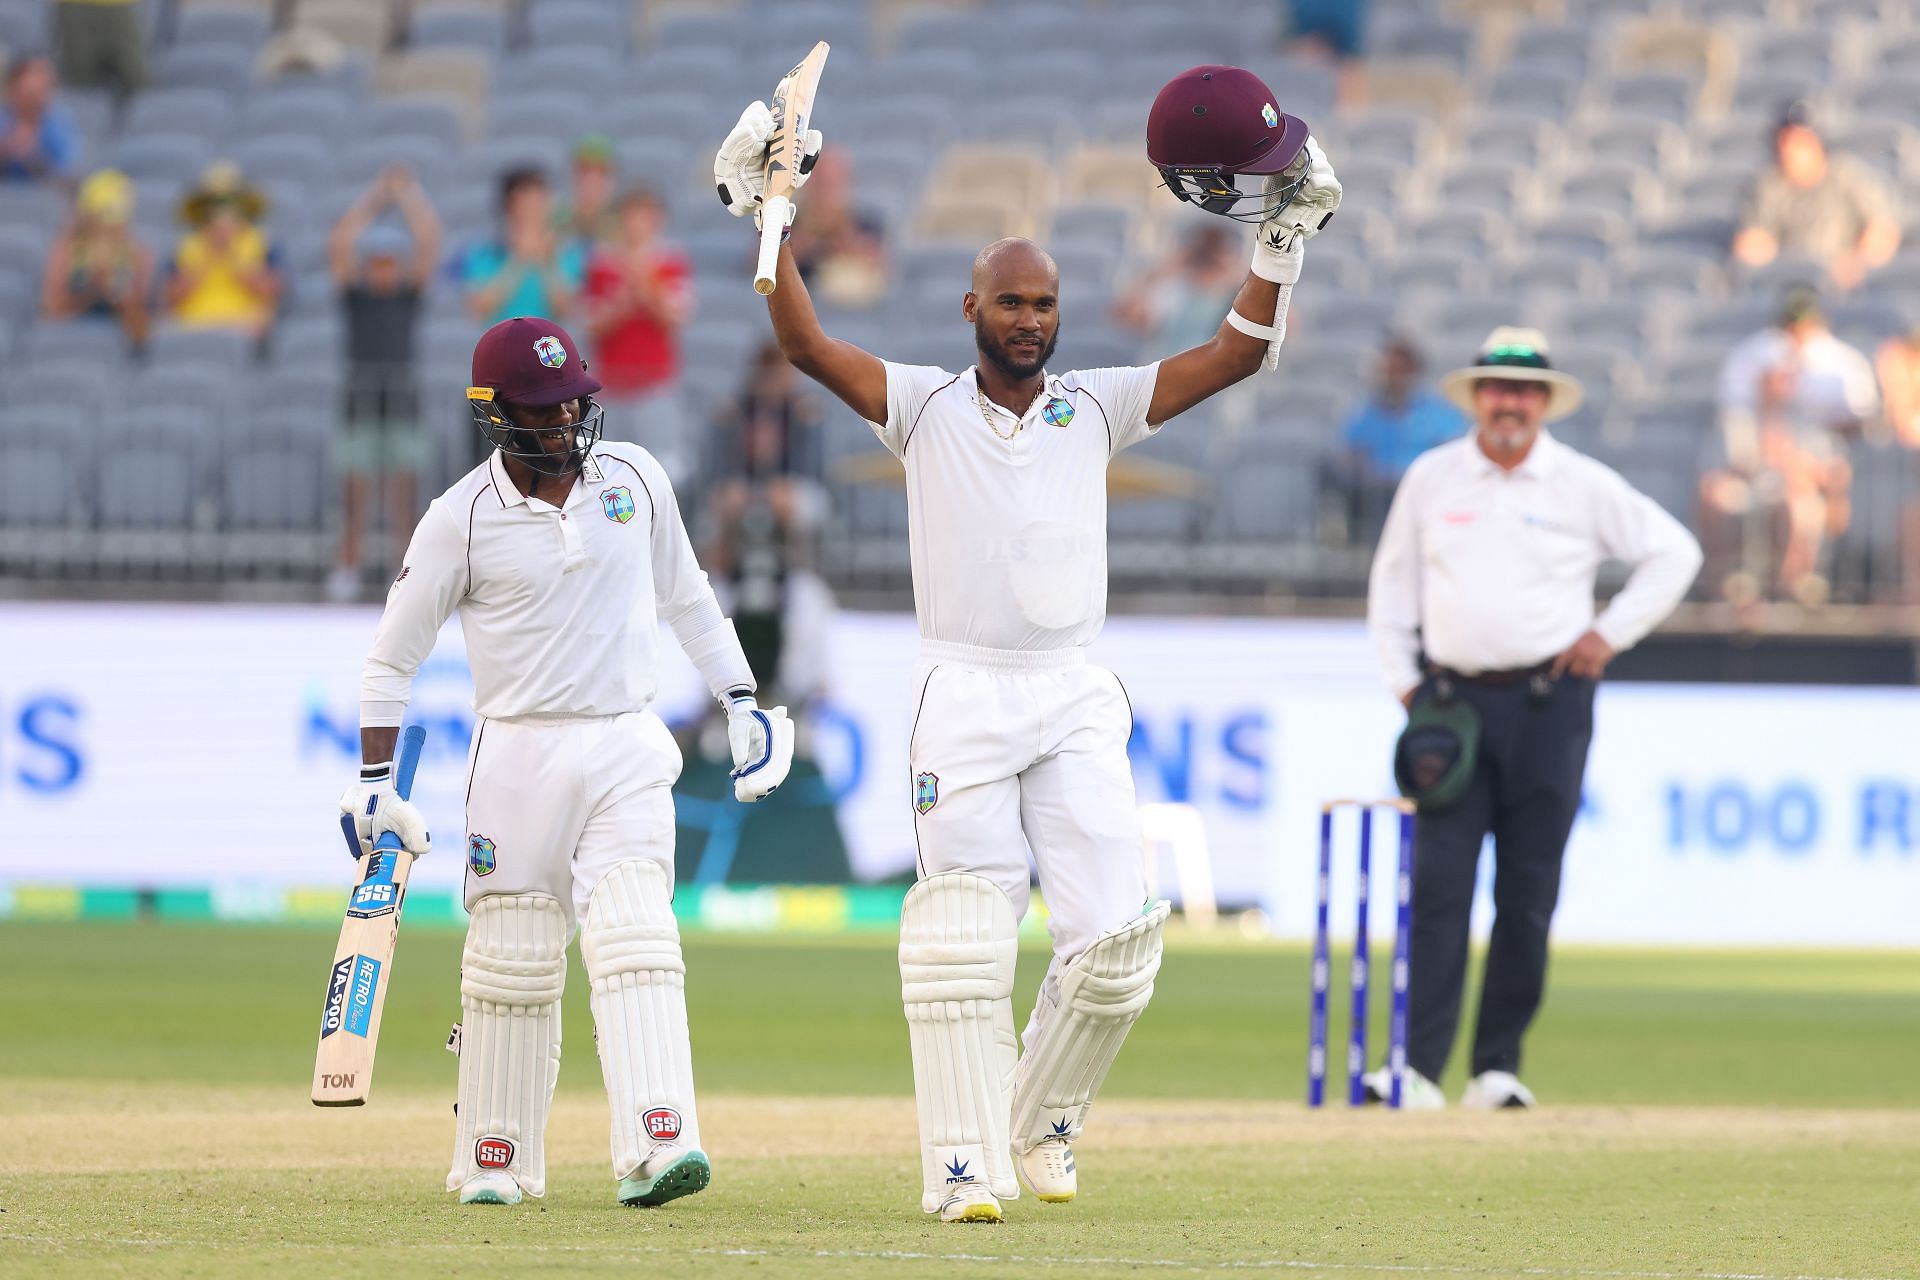 Brathwaite has come into his own in the last few years, and is now the captain of the West Indies